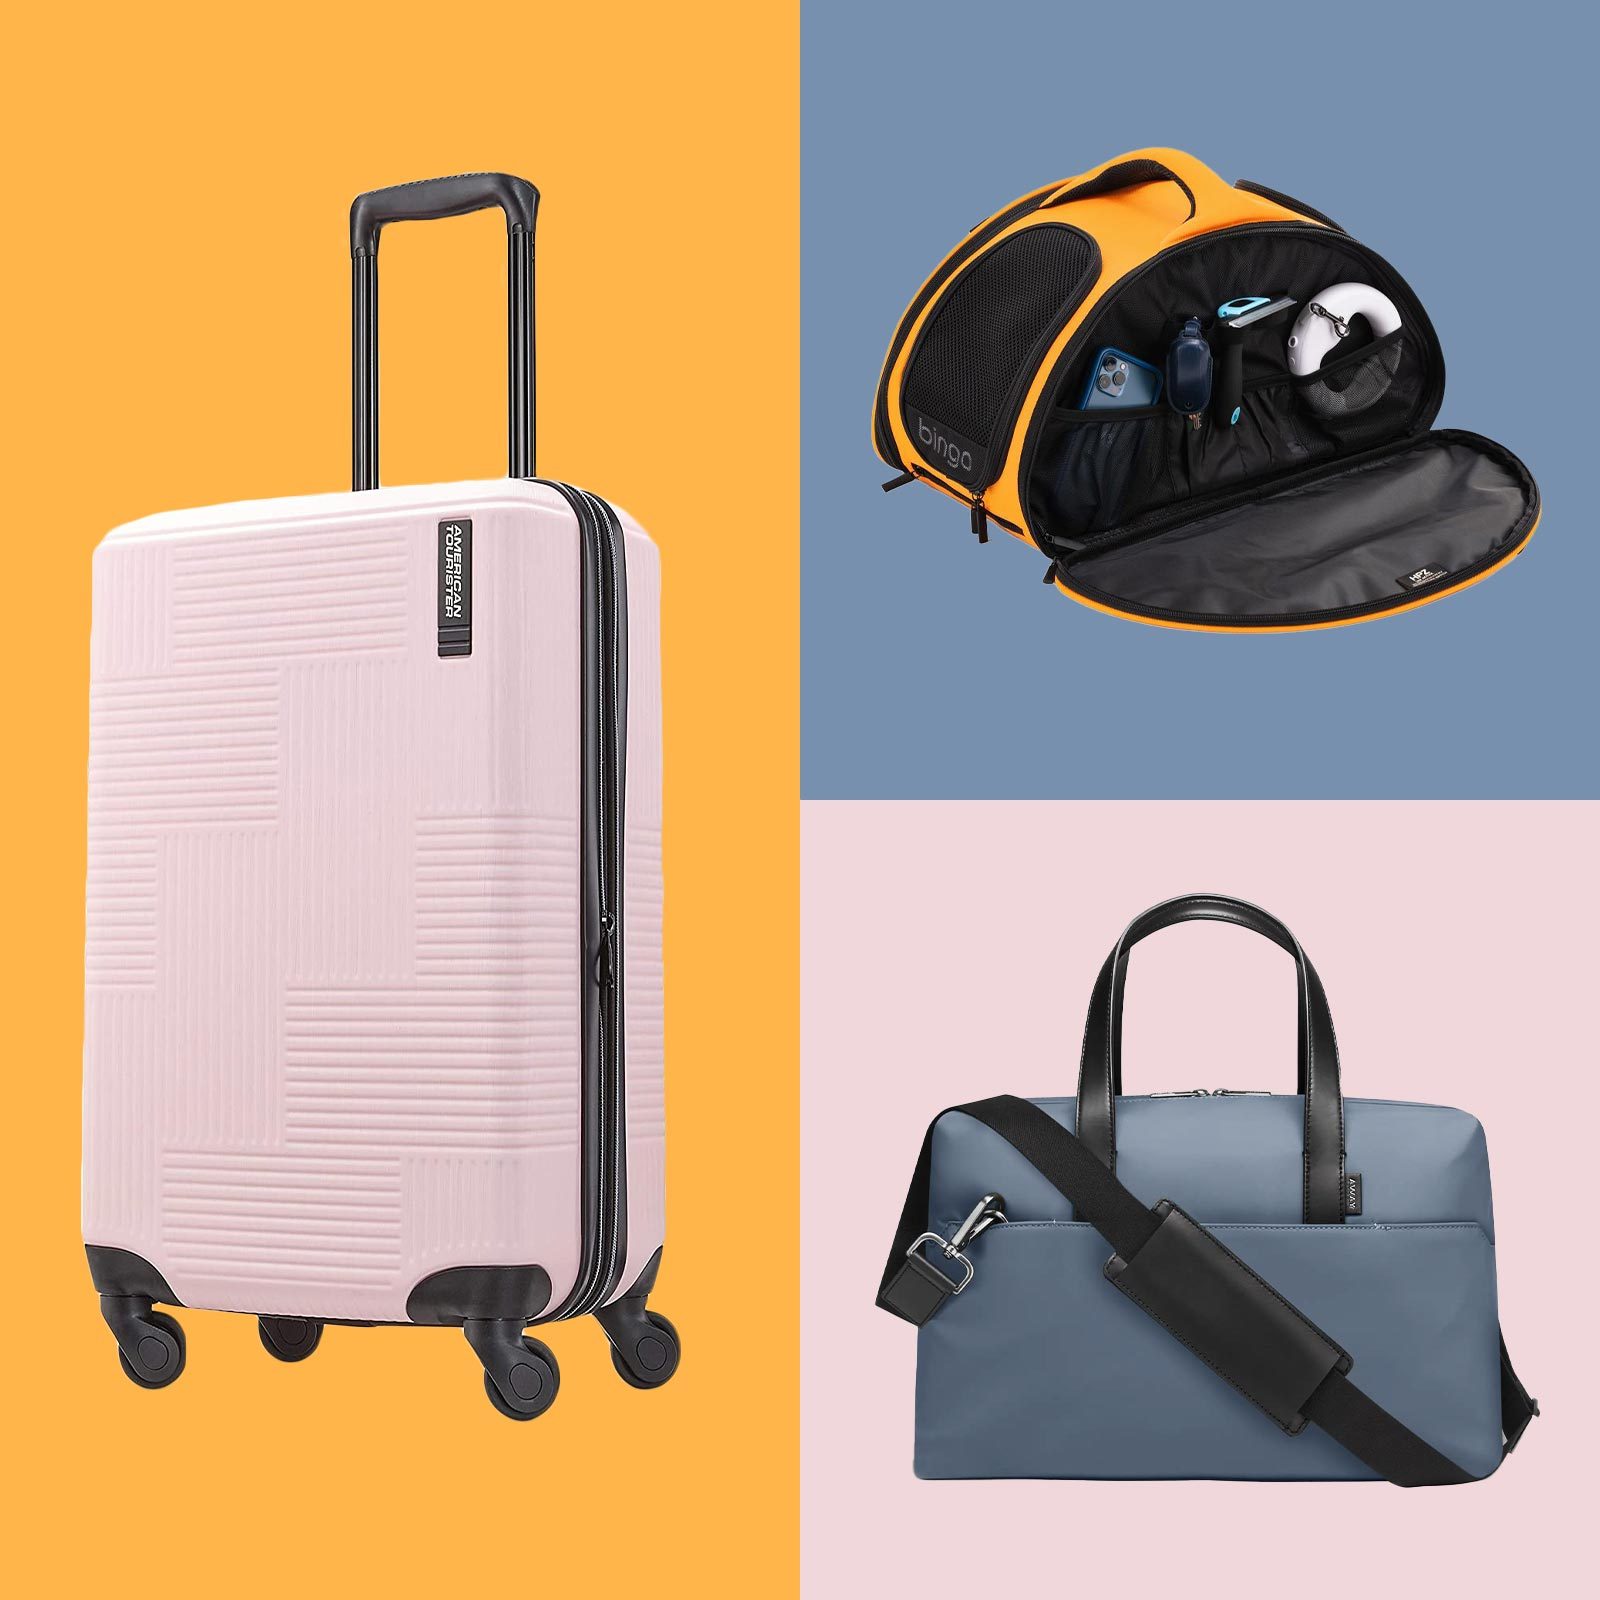 The best cabin bags and suitcases for your next trip